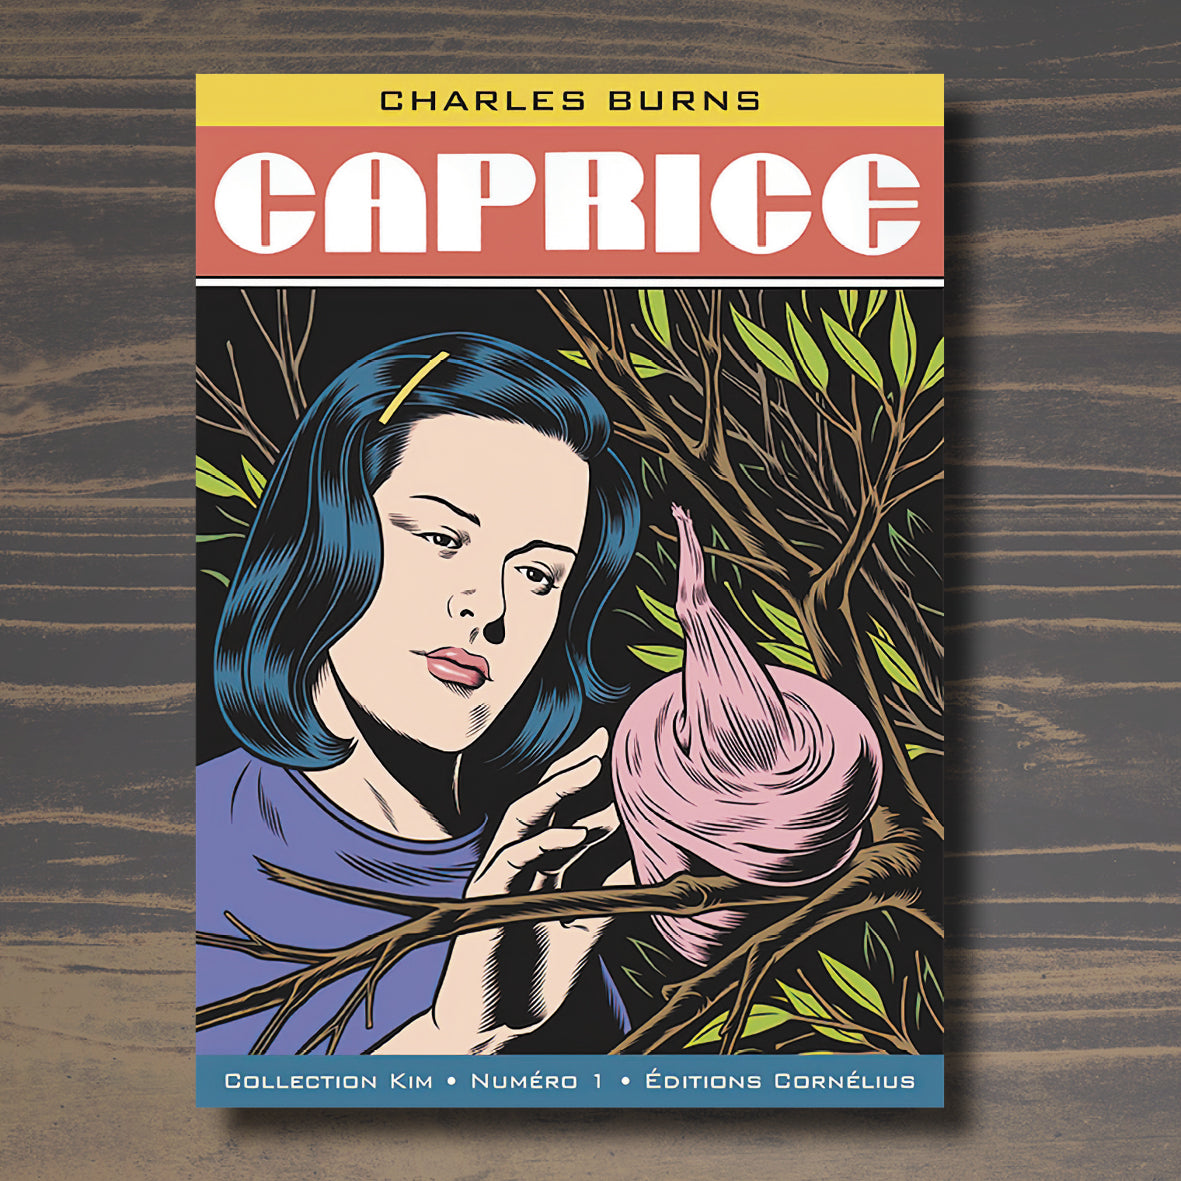 Caprice by Charles Burns